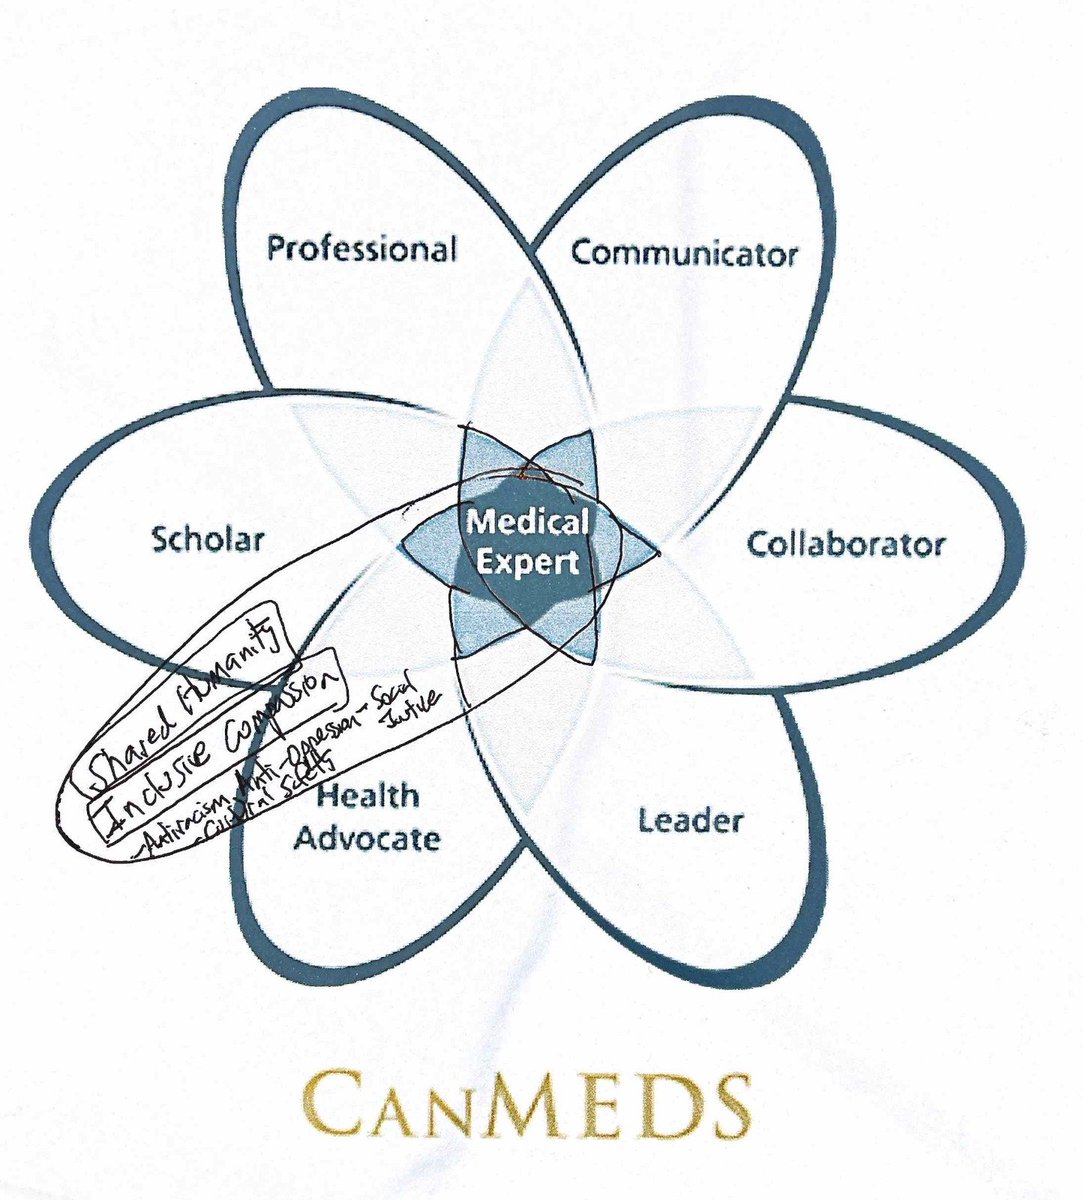 Based on 23 years in ER, work with populations in crisis, social advocacy and my ER shift last night with those with minor problems to extremis, I suggest the following CanMEDS model. The centrality of the MD remains medical expert. @KanninOsei @CMAJ @CMA_Docs @Royal_College